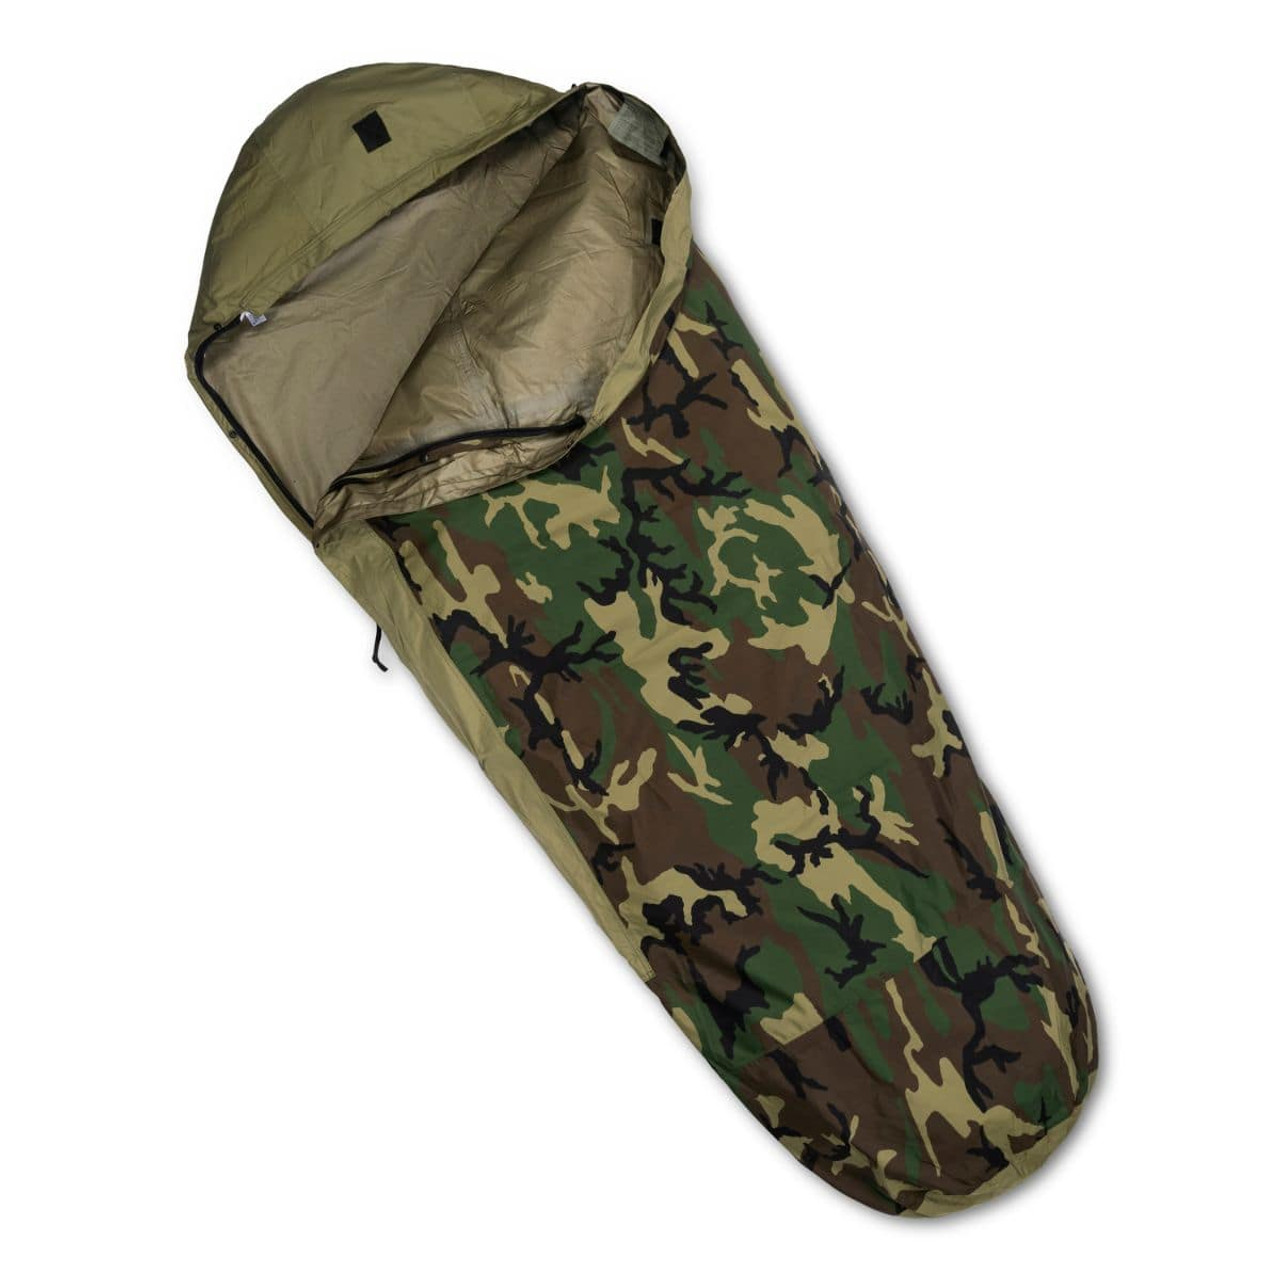 Sleeping bag M71  Military surplus from the French army  Like new  Military  Surplus  Used Equipment  Sleeping  Sleeping Bags Military Surplus  Used  Equipment  Other Equipment 